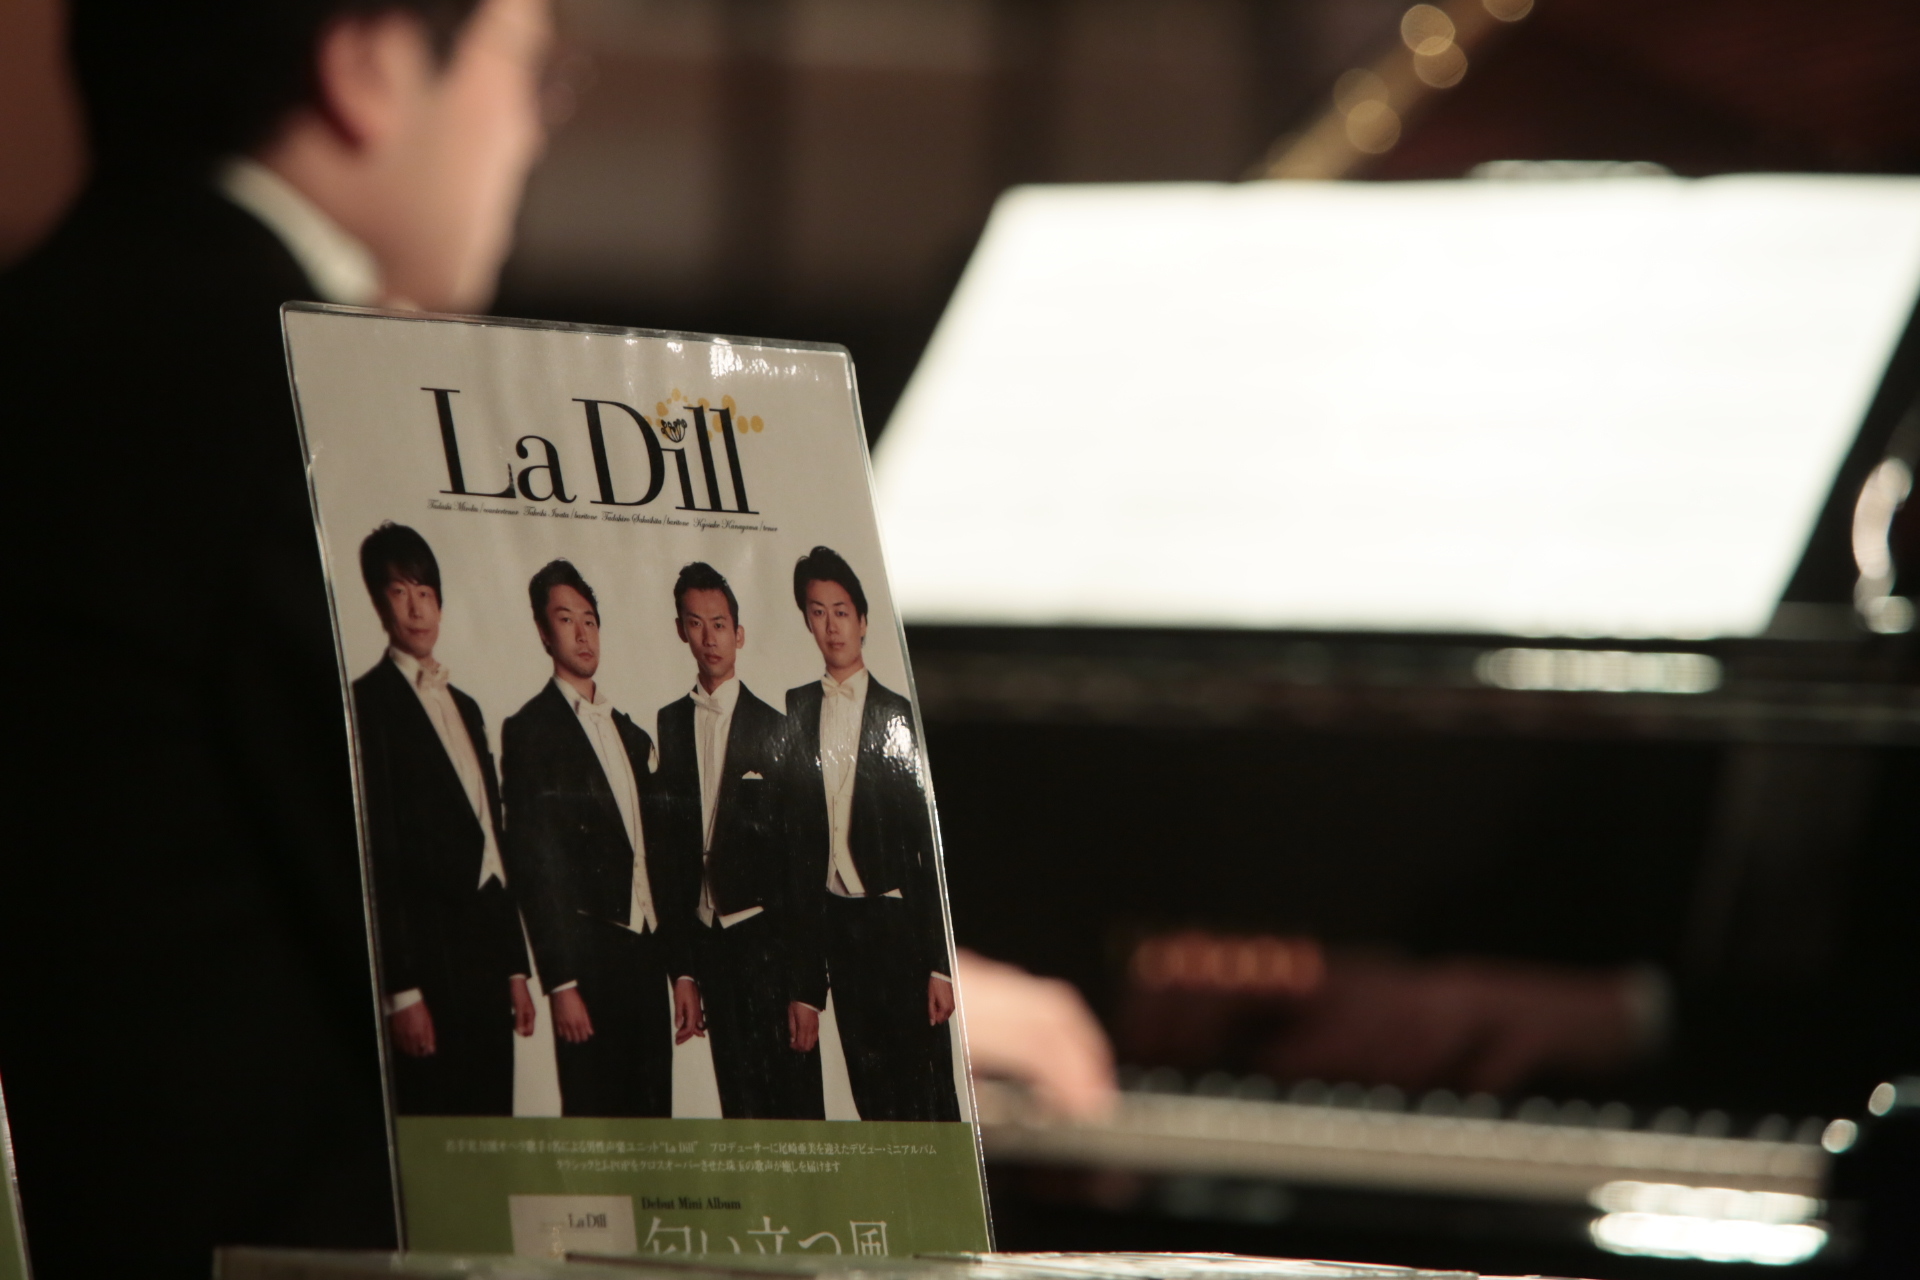 La Dill (撮影＝寺坂ジョニー）